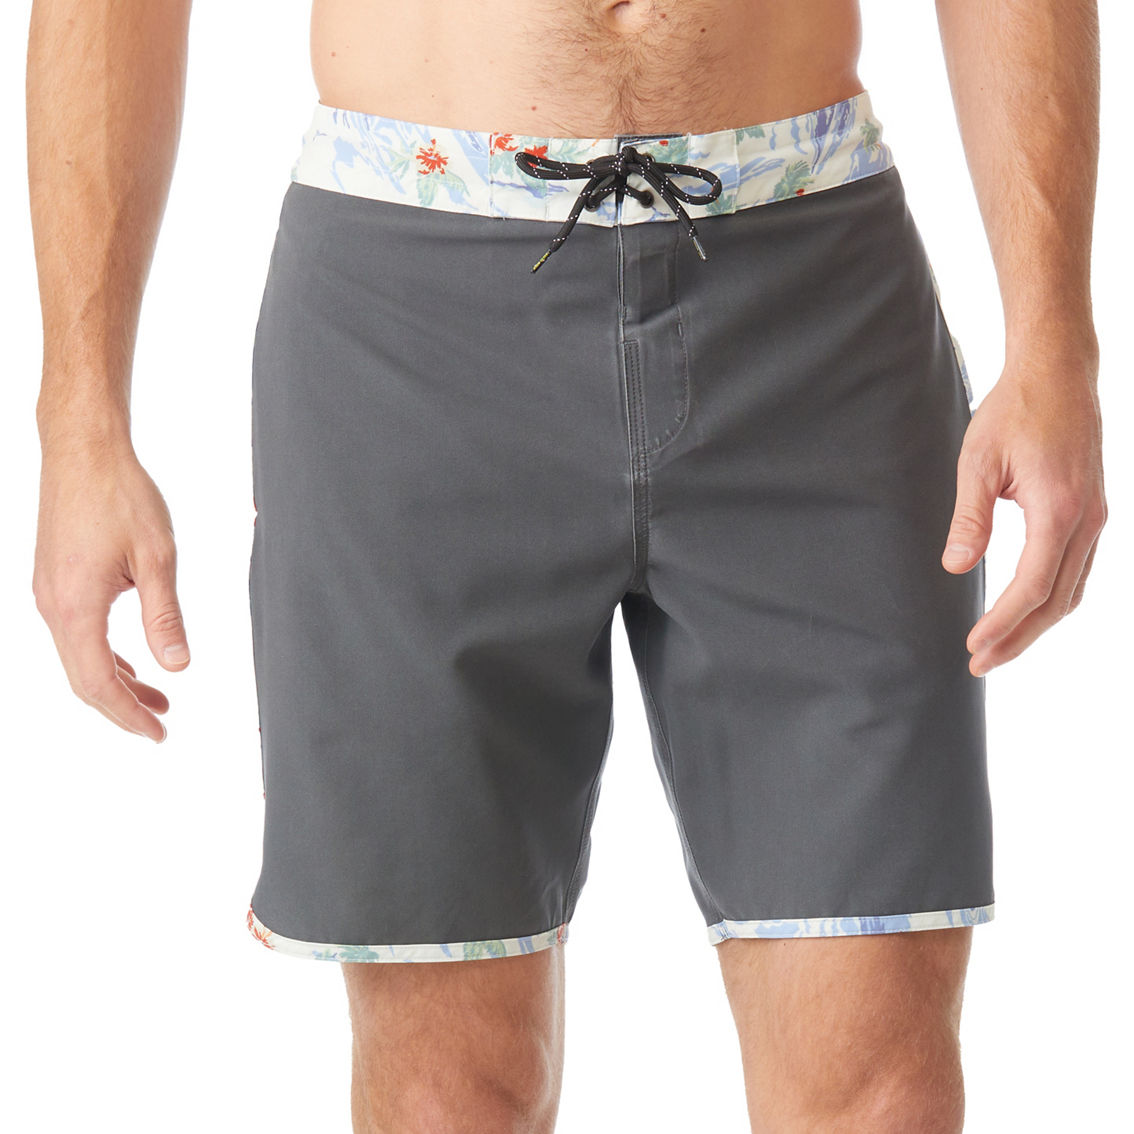 Body Glove Relaxed Fit Swim Scallop Board Shorts - Image 3 of 5